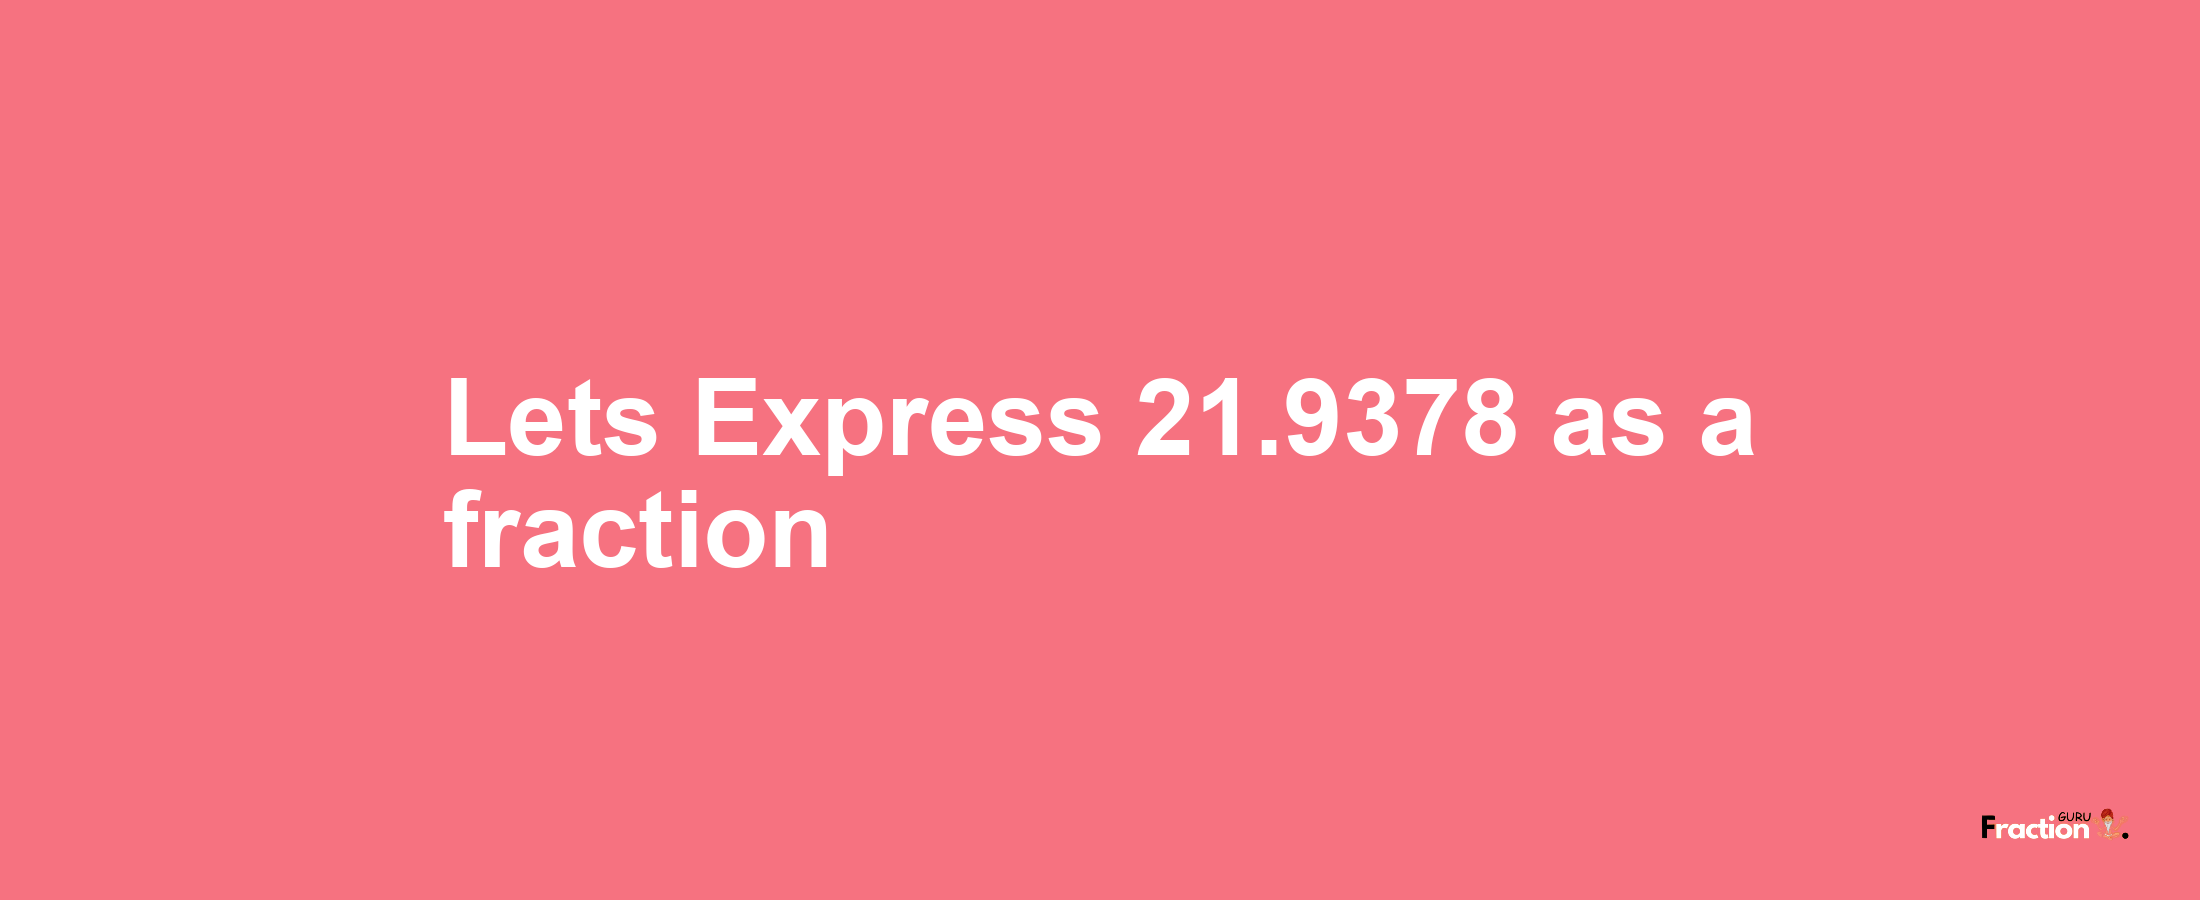 Lets Express 21.9378 as afraction